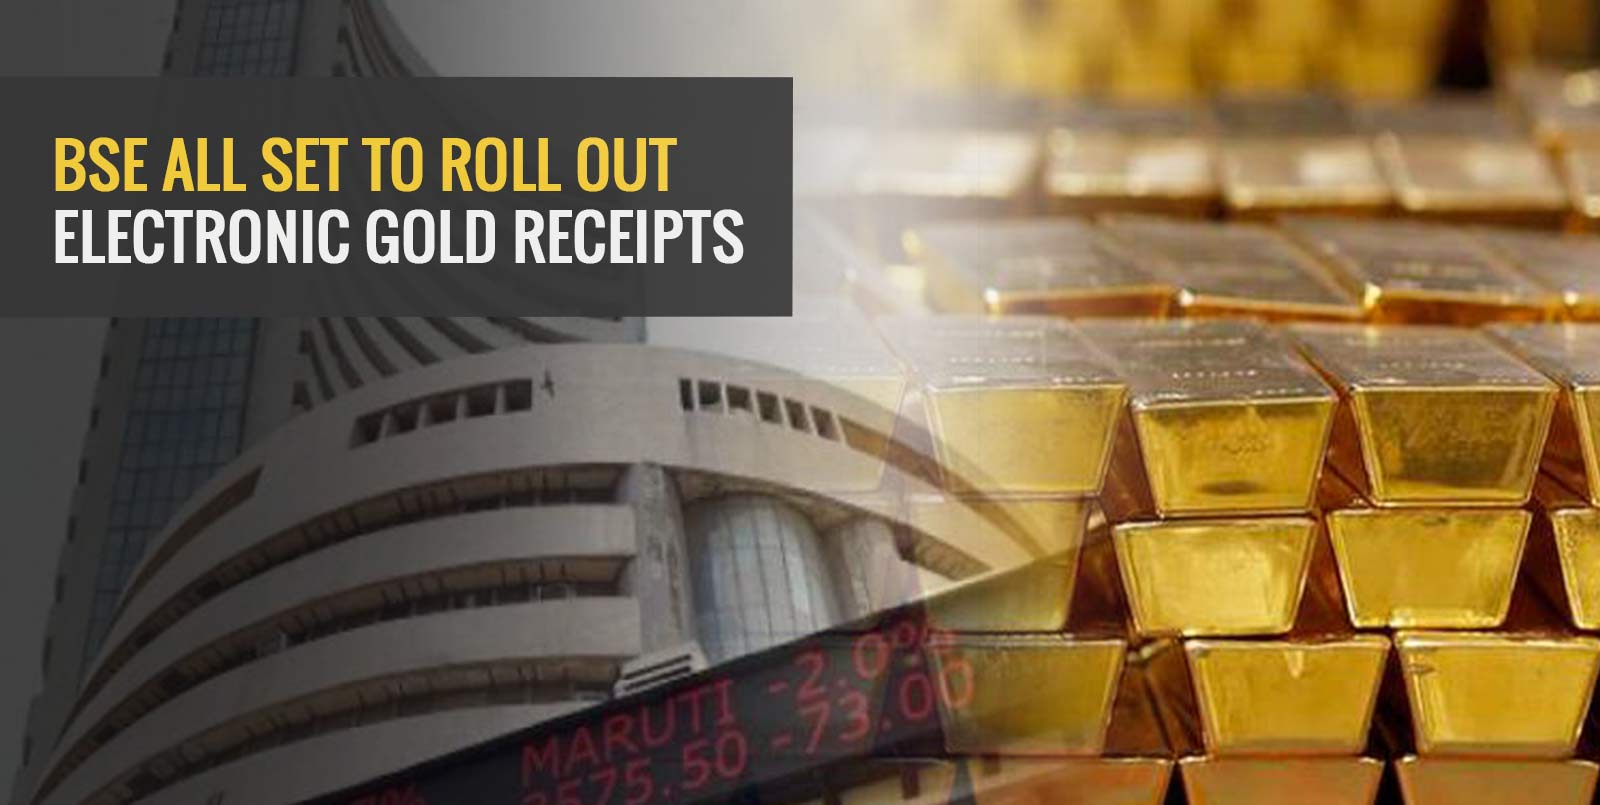 Electronic gold receipts are now ‘securities’, says Finance Ministry